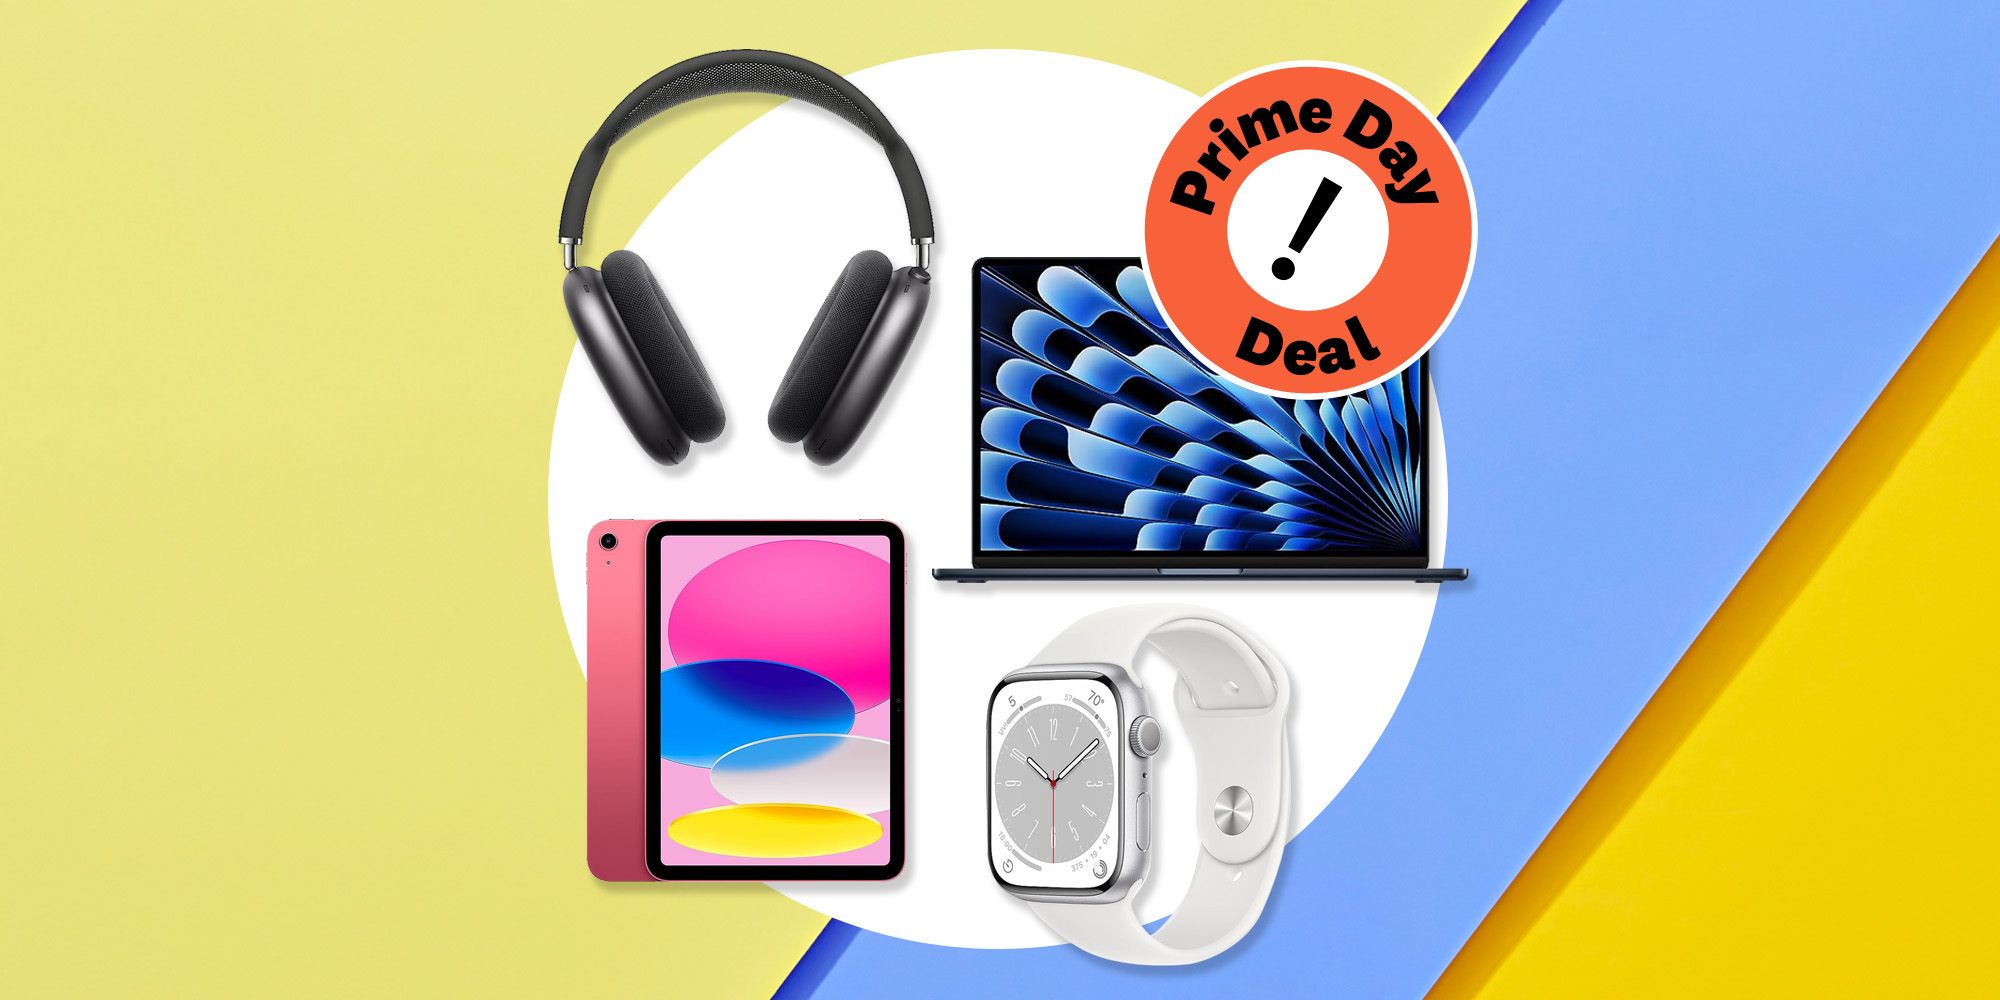 Don't miss the best  Prime Day iPad deals of 2023